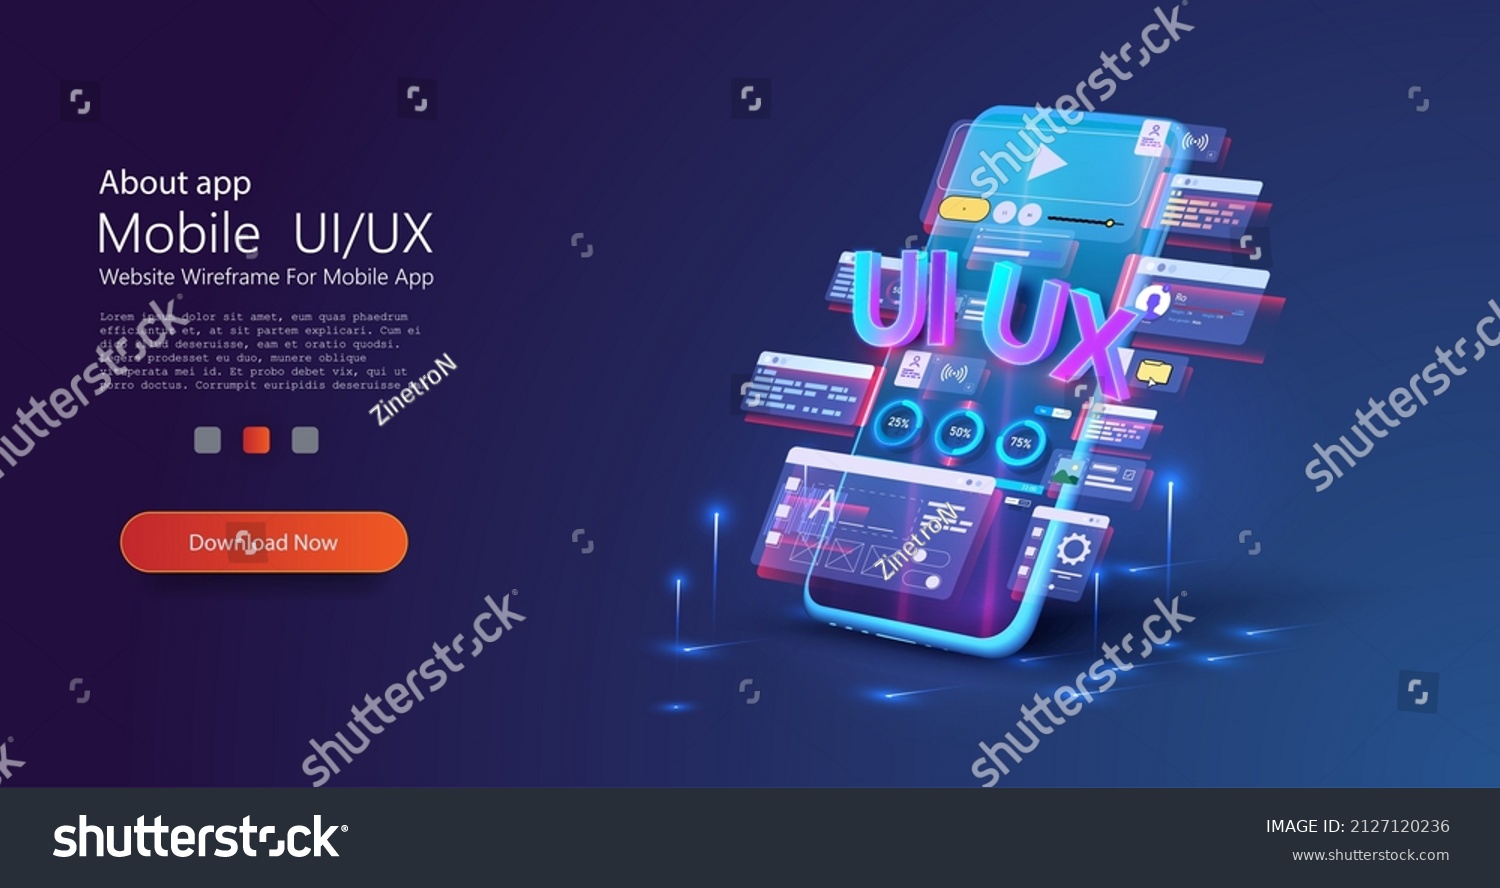 SVG of Designer, creator of an individual design of user interface scenes for a mobile UI,UX application. Blue neon design of mobile applications. Smartphone layout with active blocks and connections. Vector svg